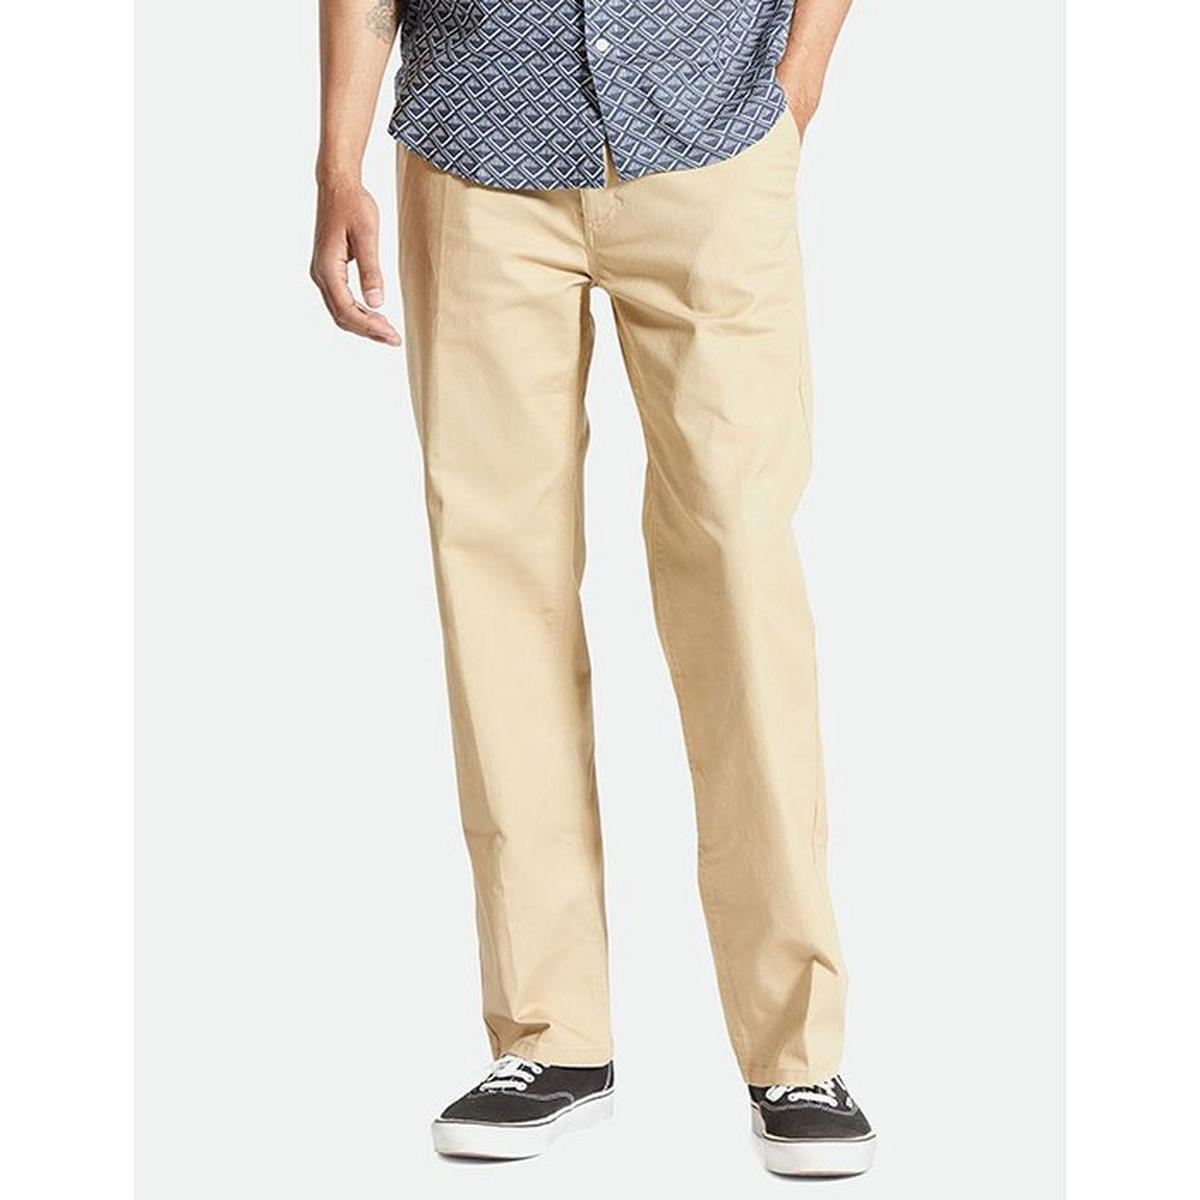 Men's Choice Chino Relaxed Pant